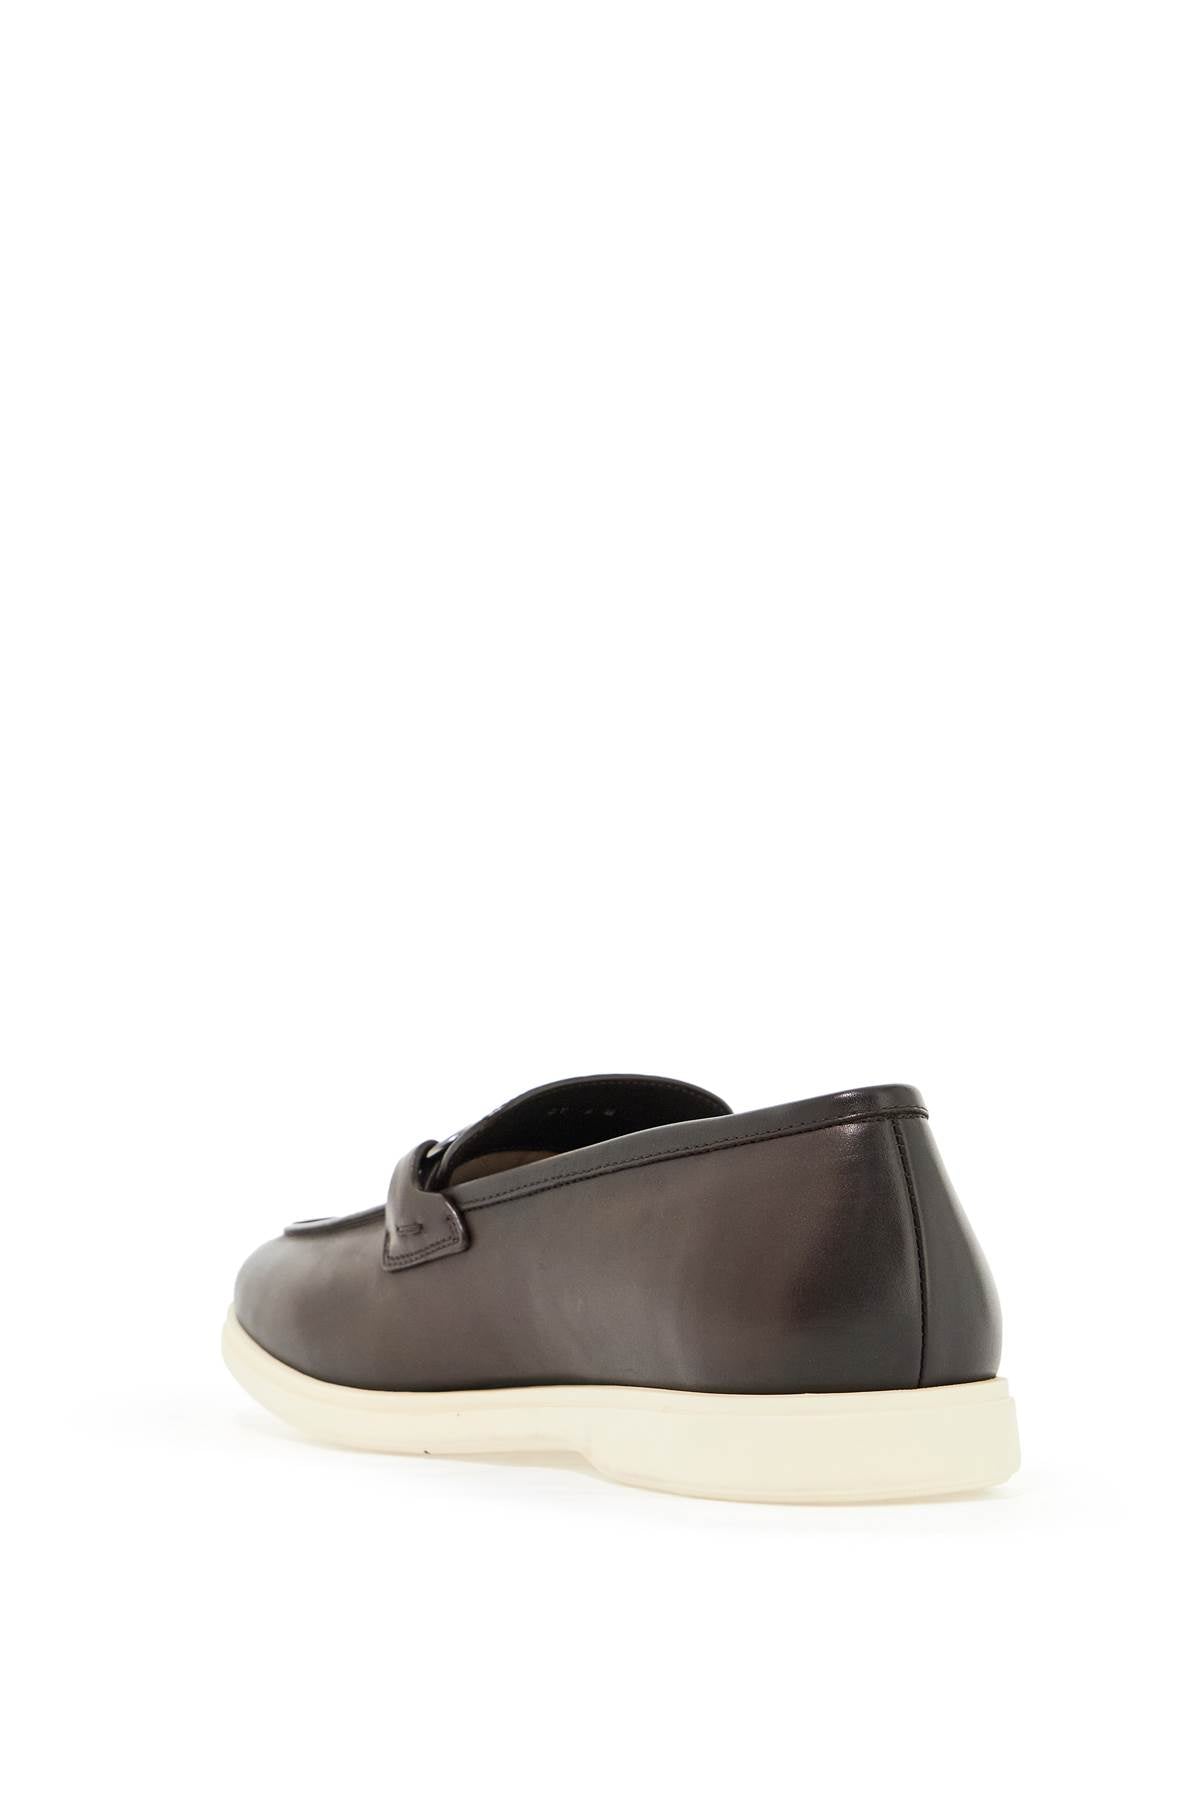 FERRAGAMO CASUAL LOAFERS WITH G